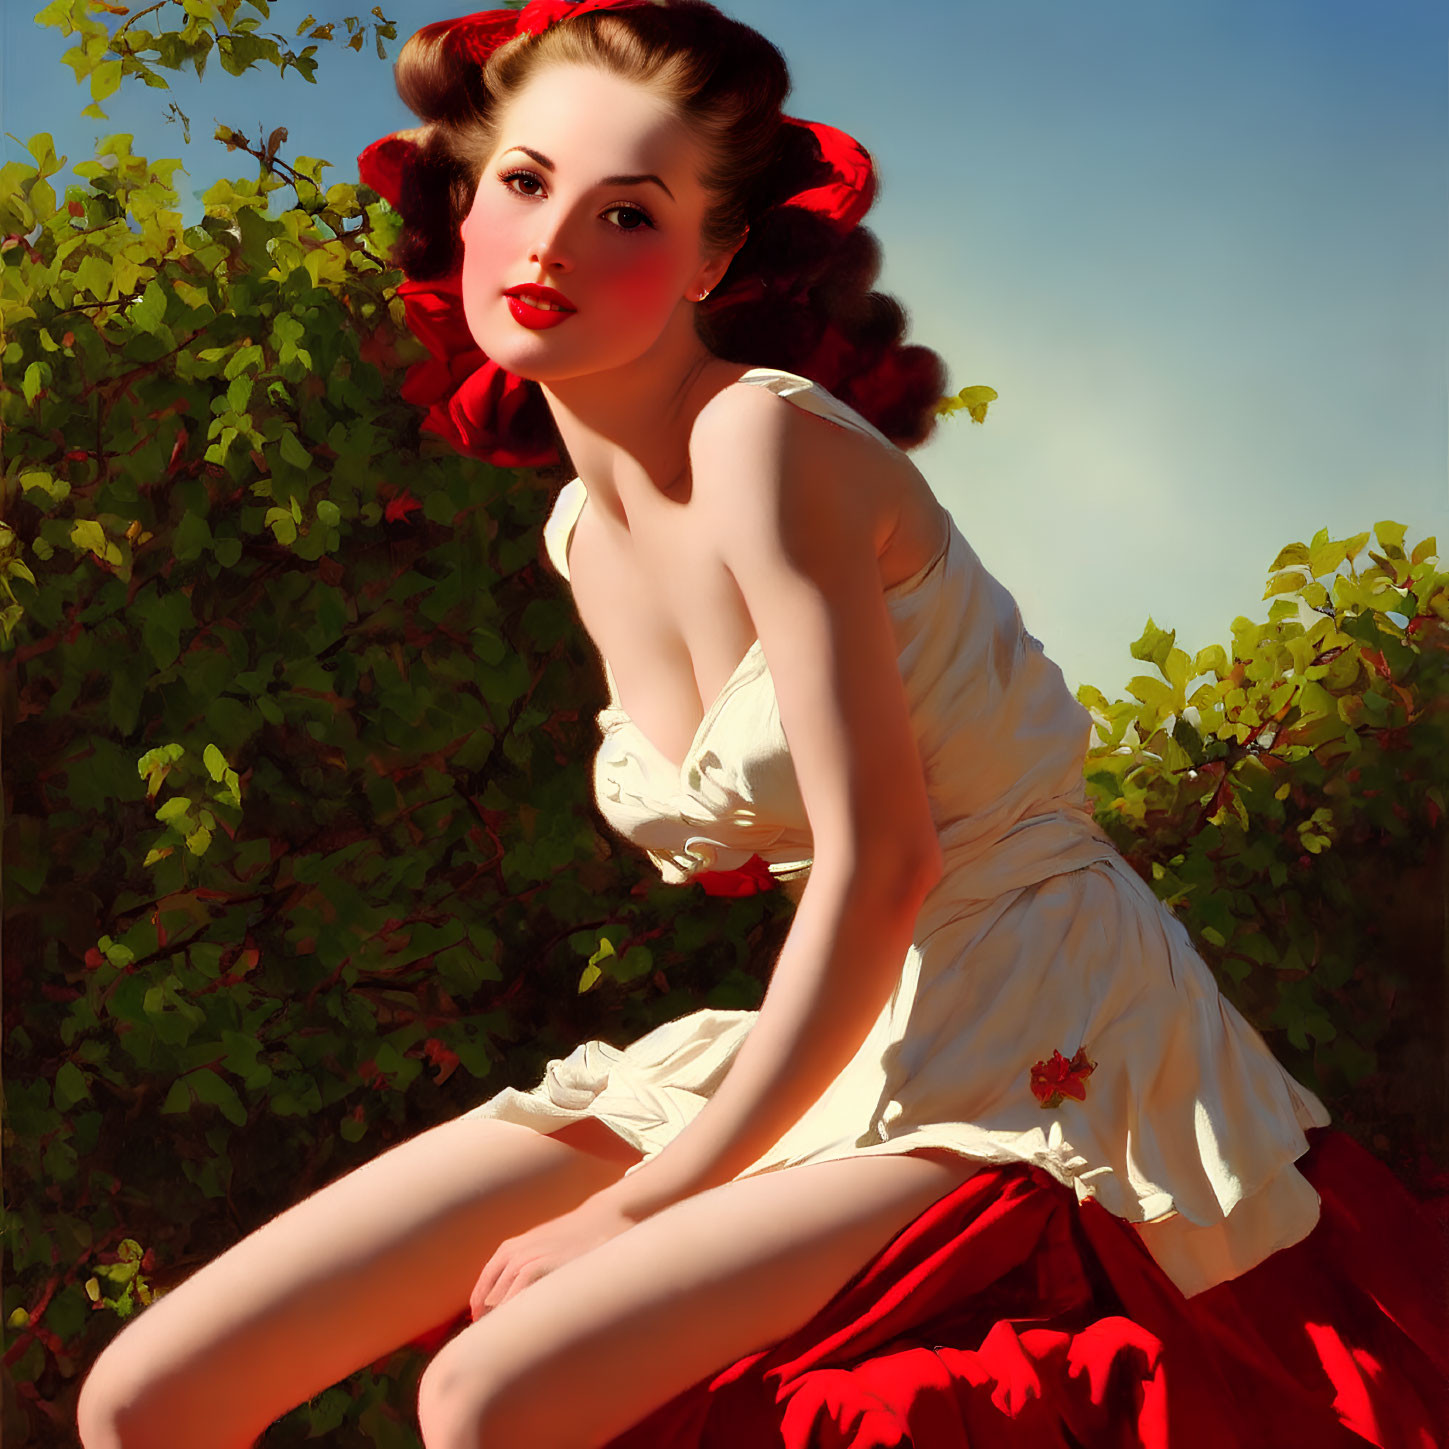 Vintage-style illustration of woman with dark hair, red accessories, green foliage backdrop, white dress.